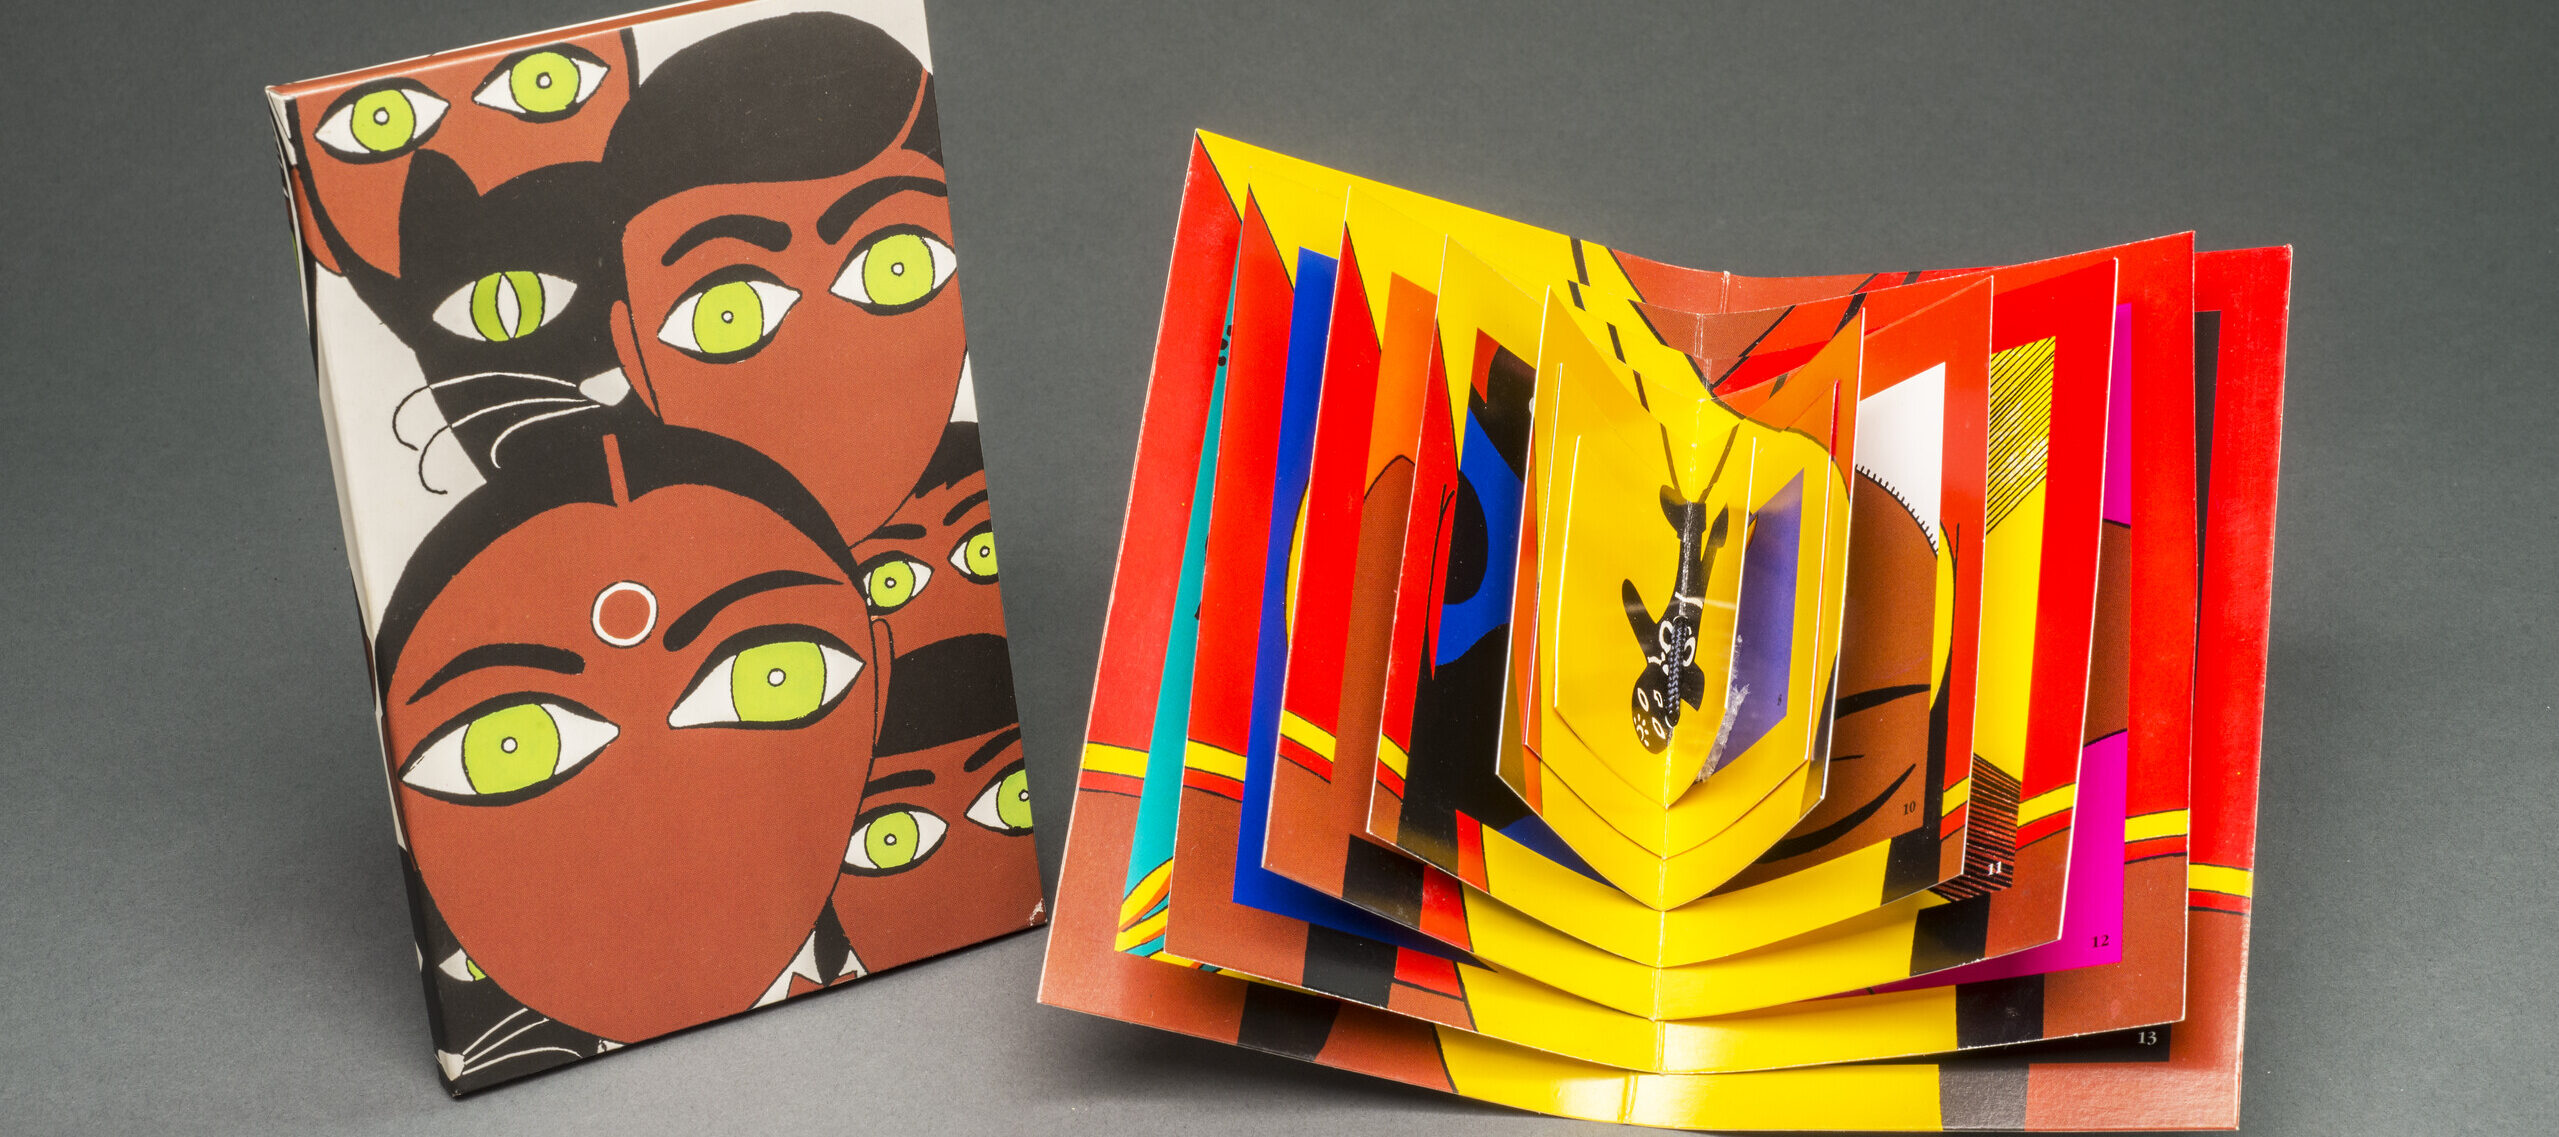 A brightly colored book displayed open whose pages decrease in size toward the center. To the left, a vertical rectangle on which is depicted five stylized faces with black hair, medium-dark skintone,  green eyes, and no mouths. A black cat with green eyes is also among the faces.